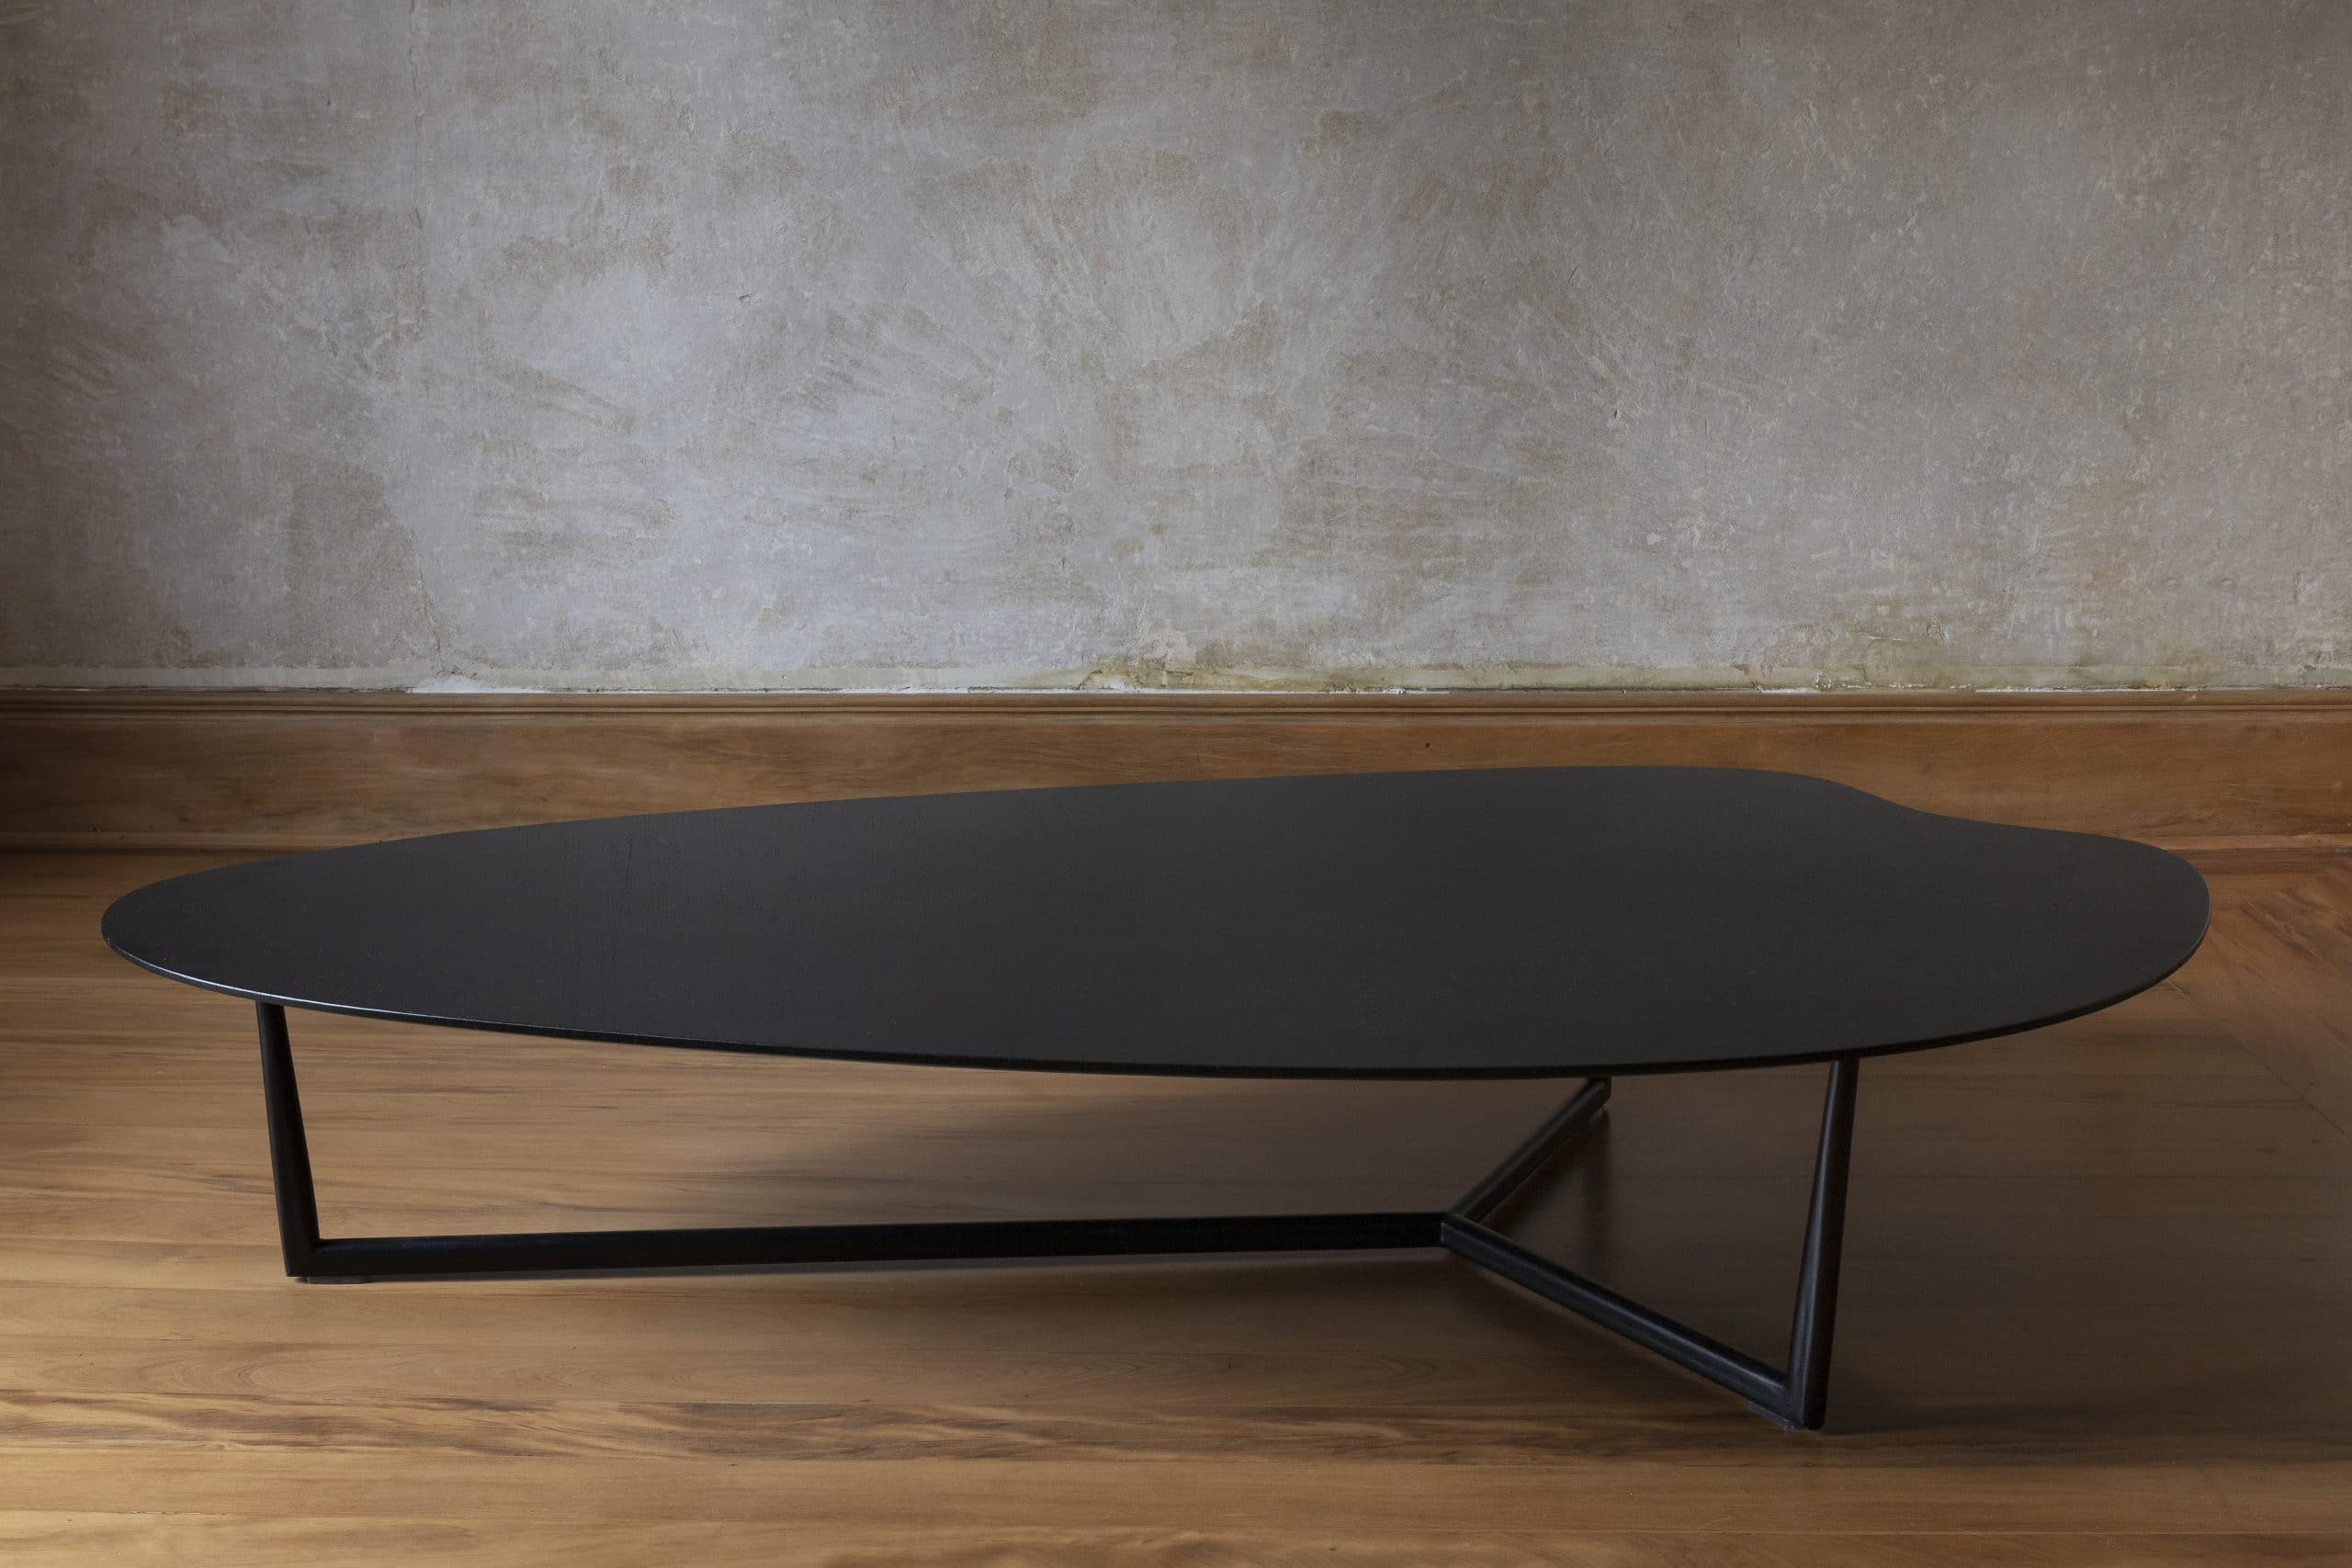 Ken Coffee Table by Doimo Brasil
Dimensions:  W 160 x D 80 x H 30 cm 
Materials: Base: metal, Top: veneer or lacquer.


With the intention of providing good taste and personality, Doimo deciphers trends and follows the evolution of man and his